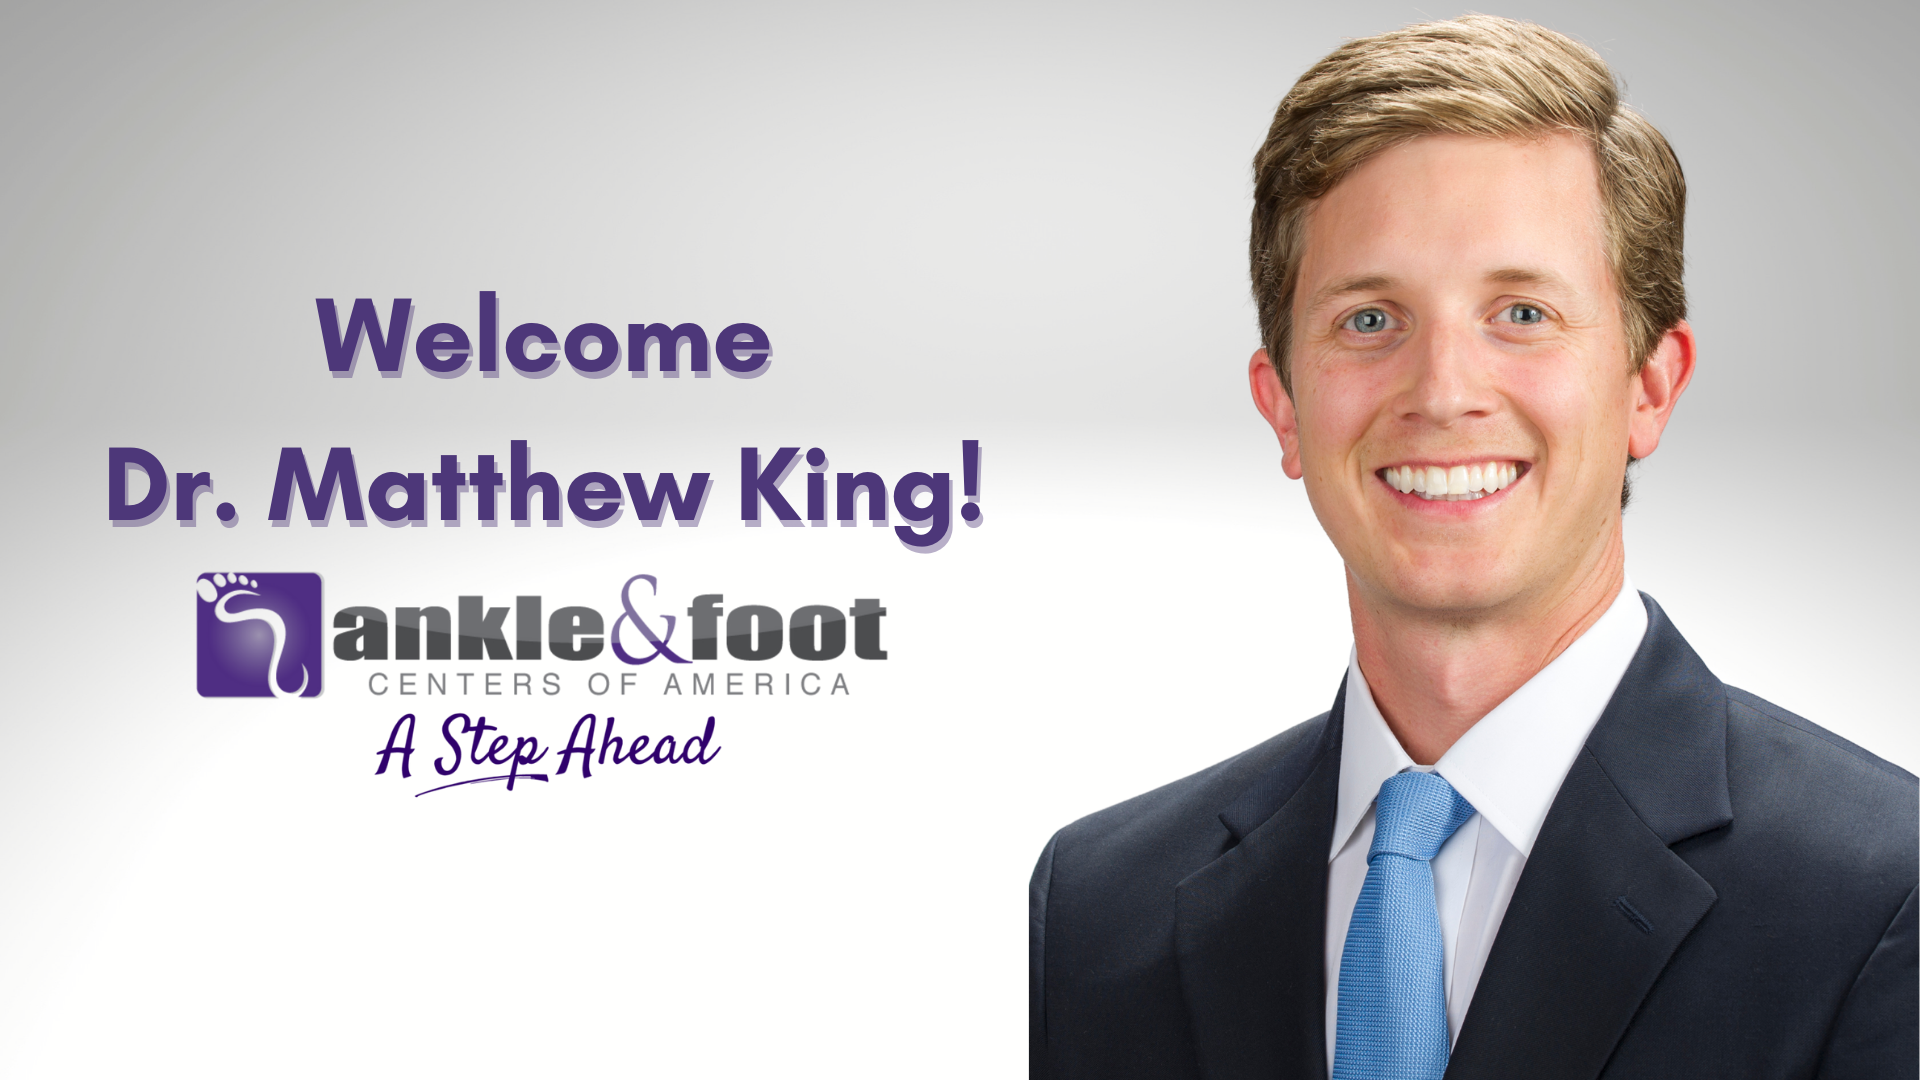 We are delighted to announce the newest member of the Ankle & Foot Centers family, Dr. Matthew King!